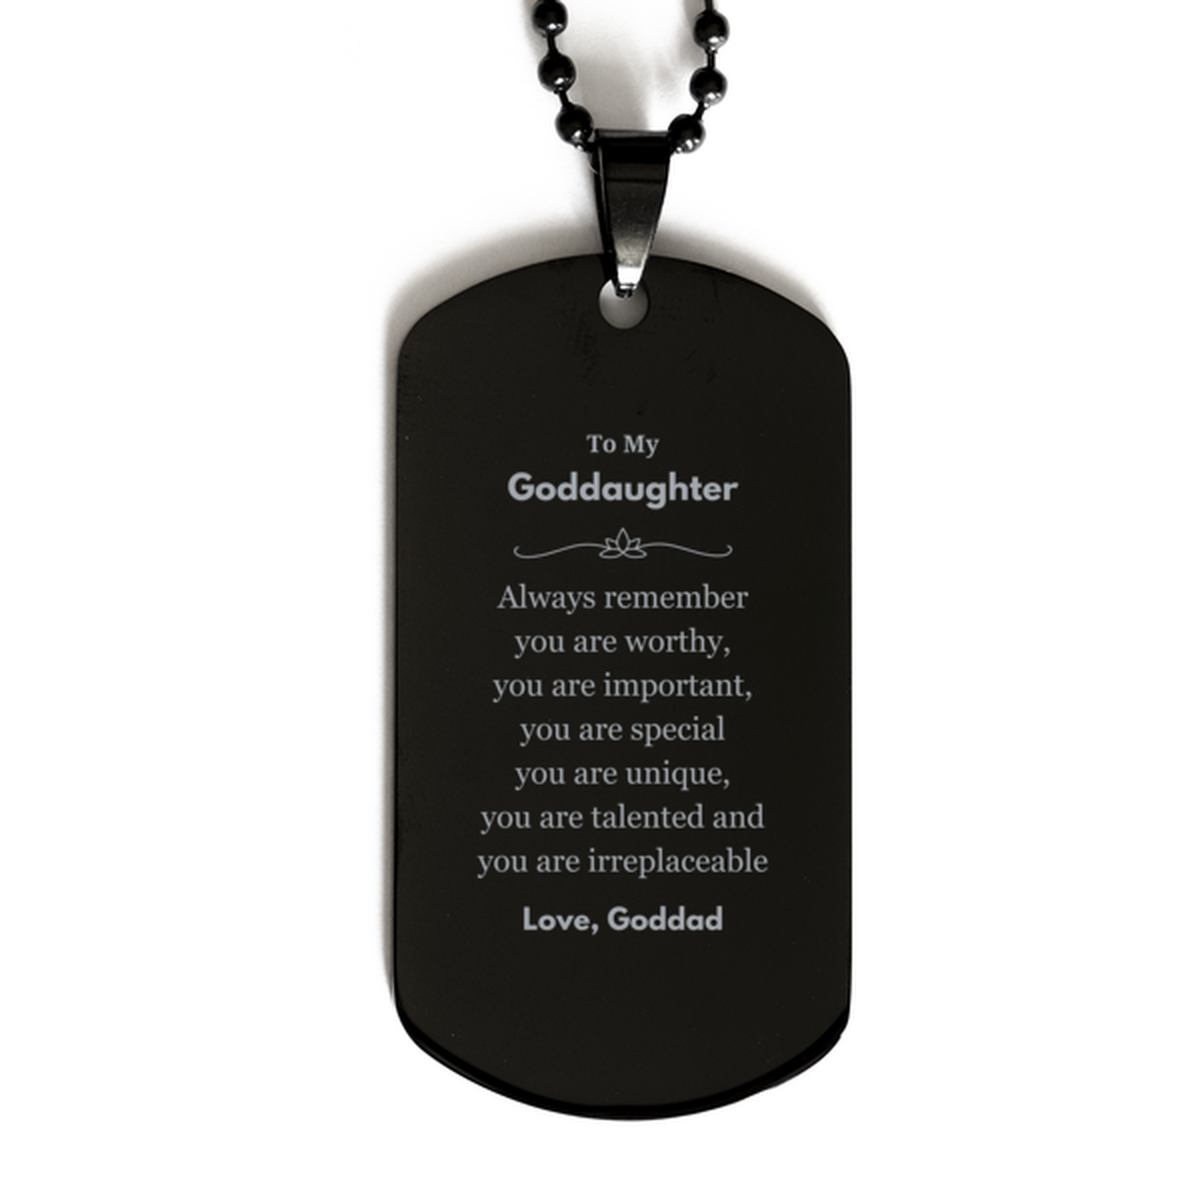 Goddaughter Birthday Gifts from Goddad, Inspirational Black Dog Tag for Goddaughter Christmas Graduation Gifts for Goddaughter Always remember you are worthy, you are important. Love, Goddad